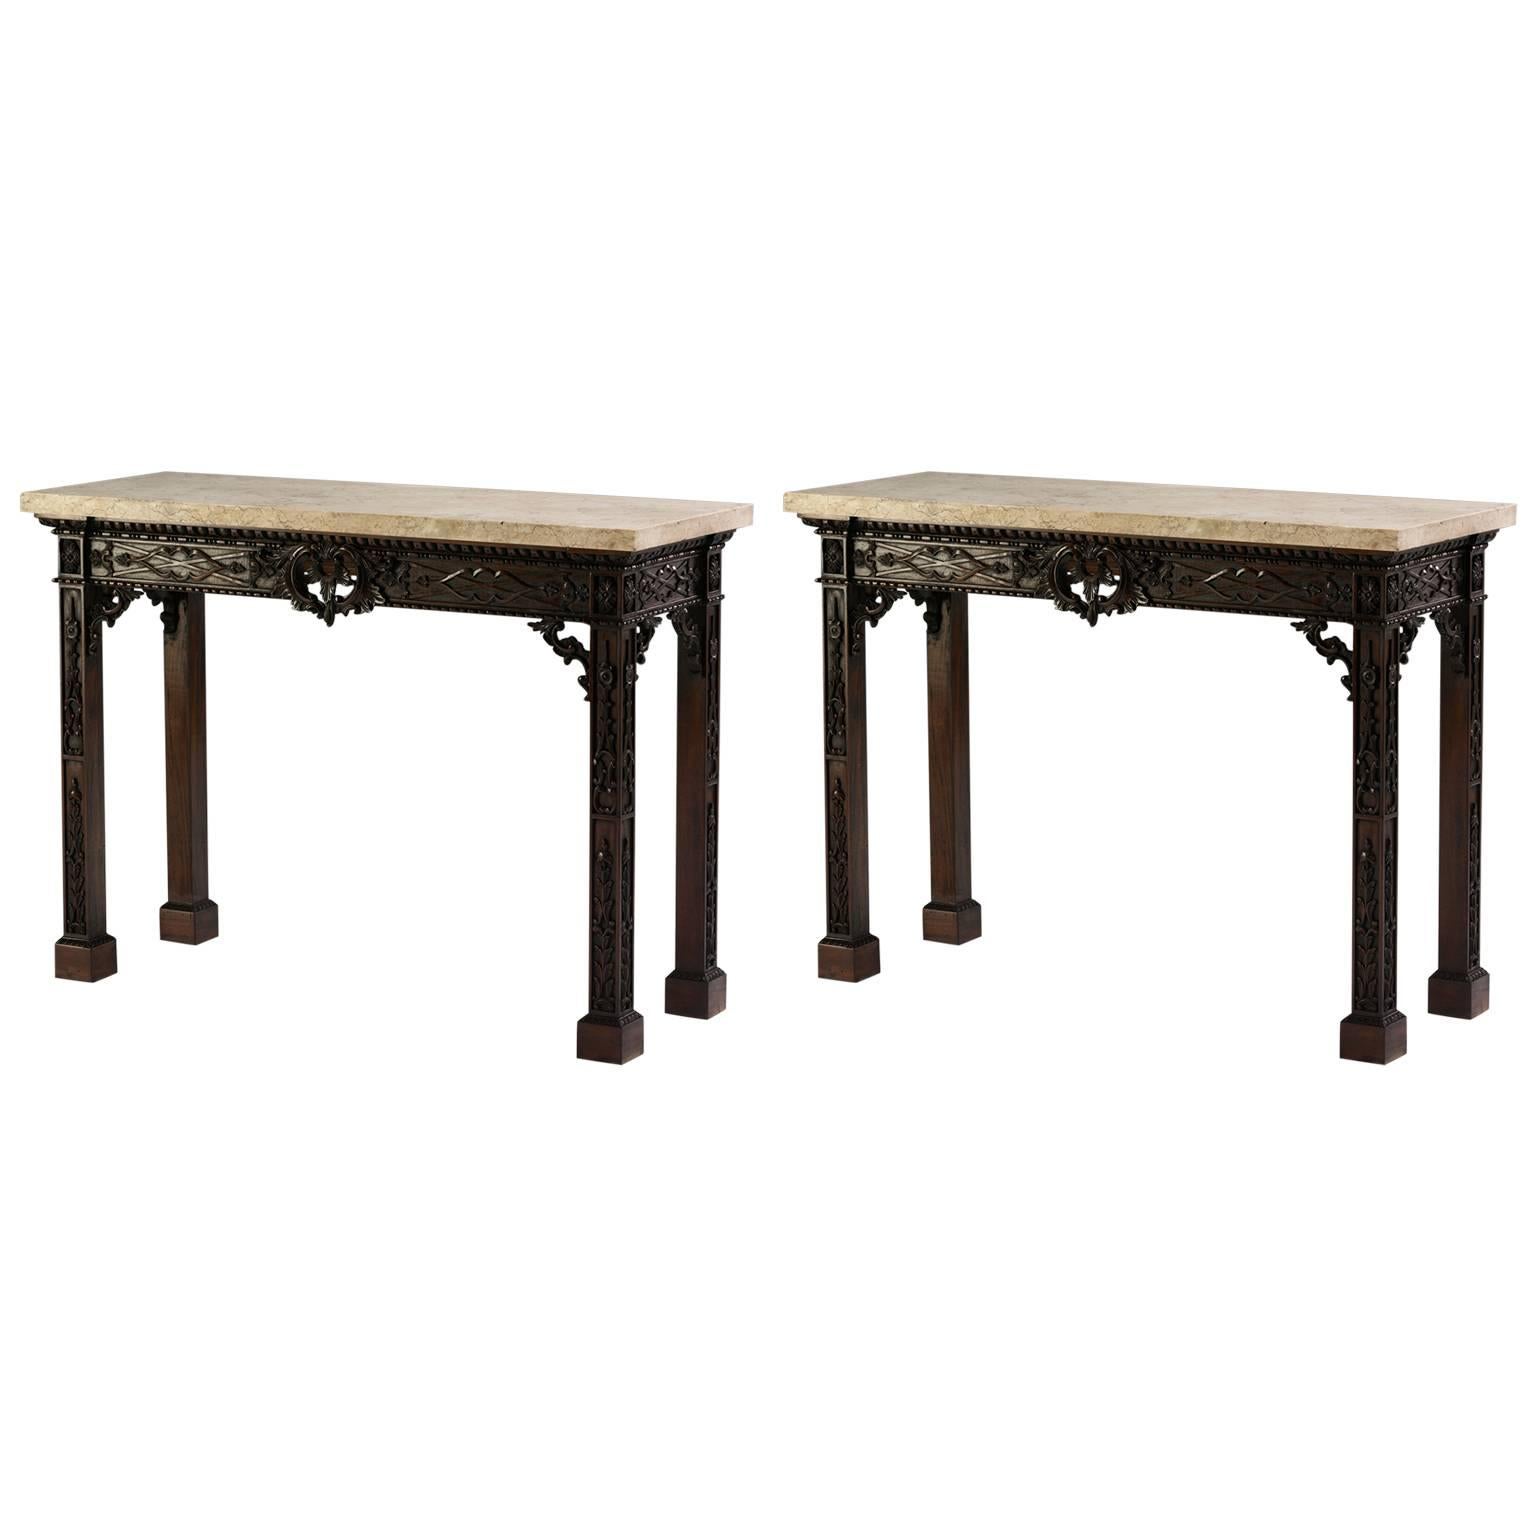 Fret Pier Tables in the Chippendale manner